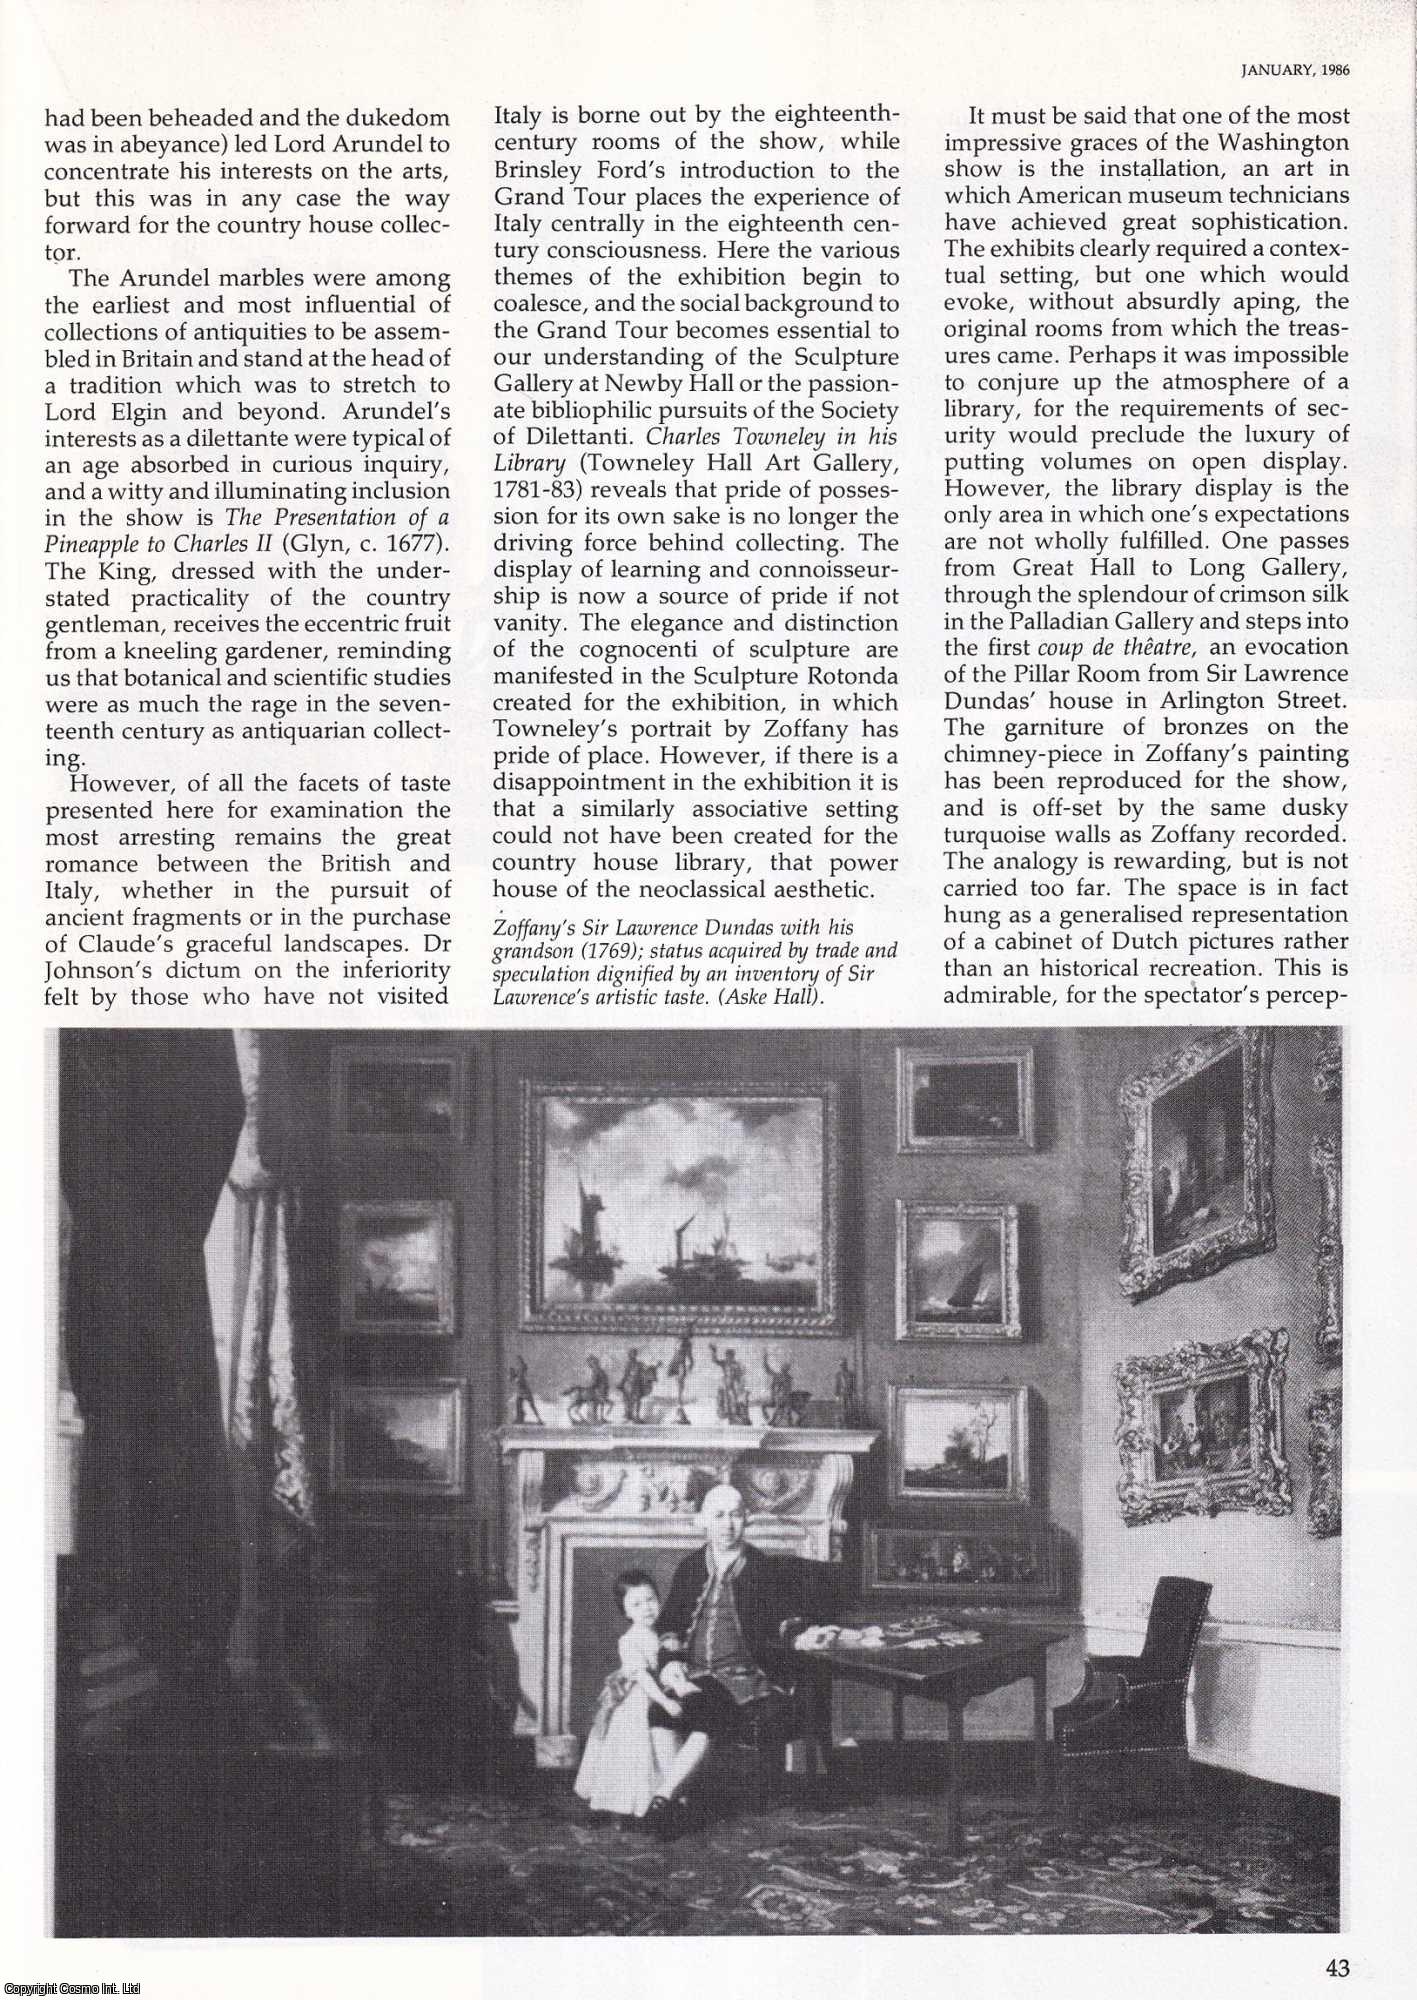 Stephen Jones - Treasure Houses of Britain. An original article from History Today, 1986.